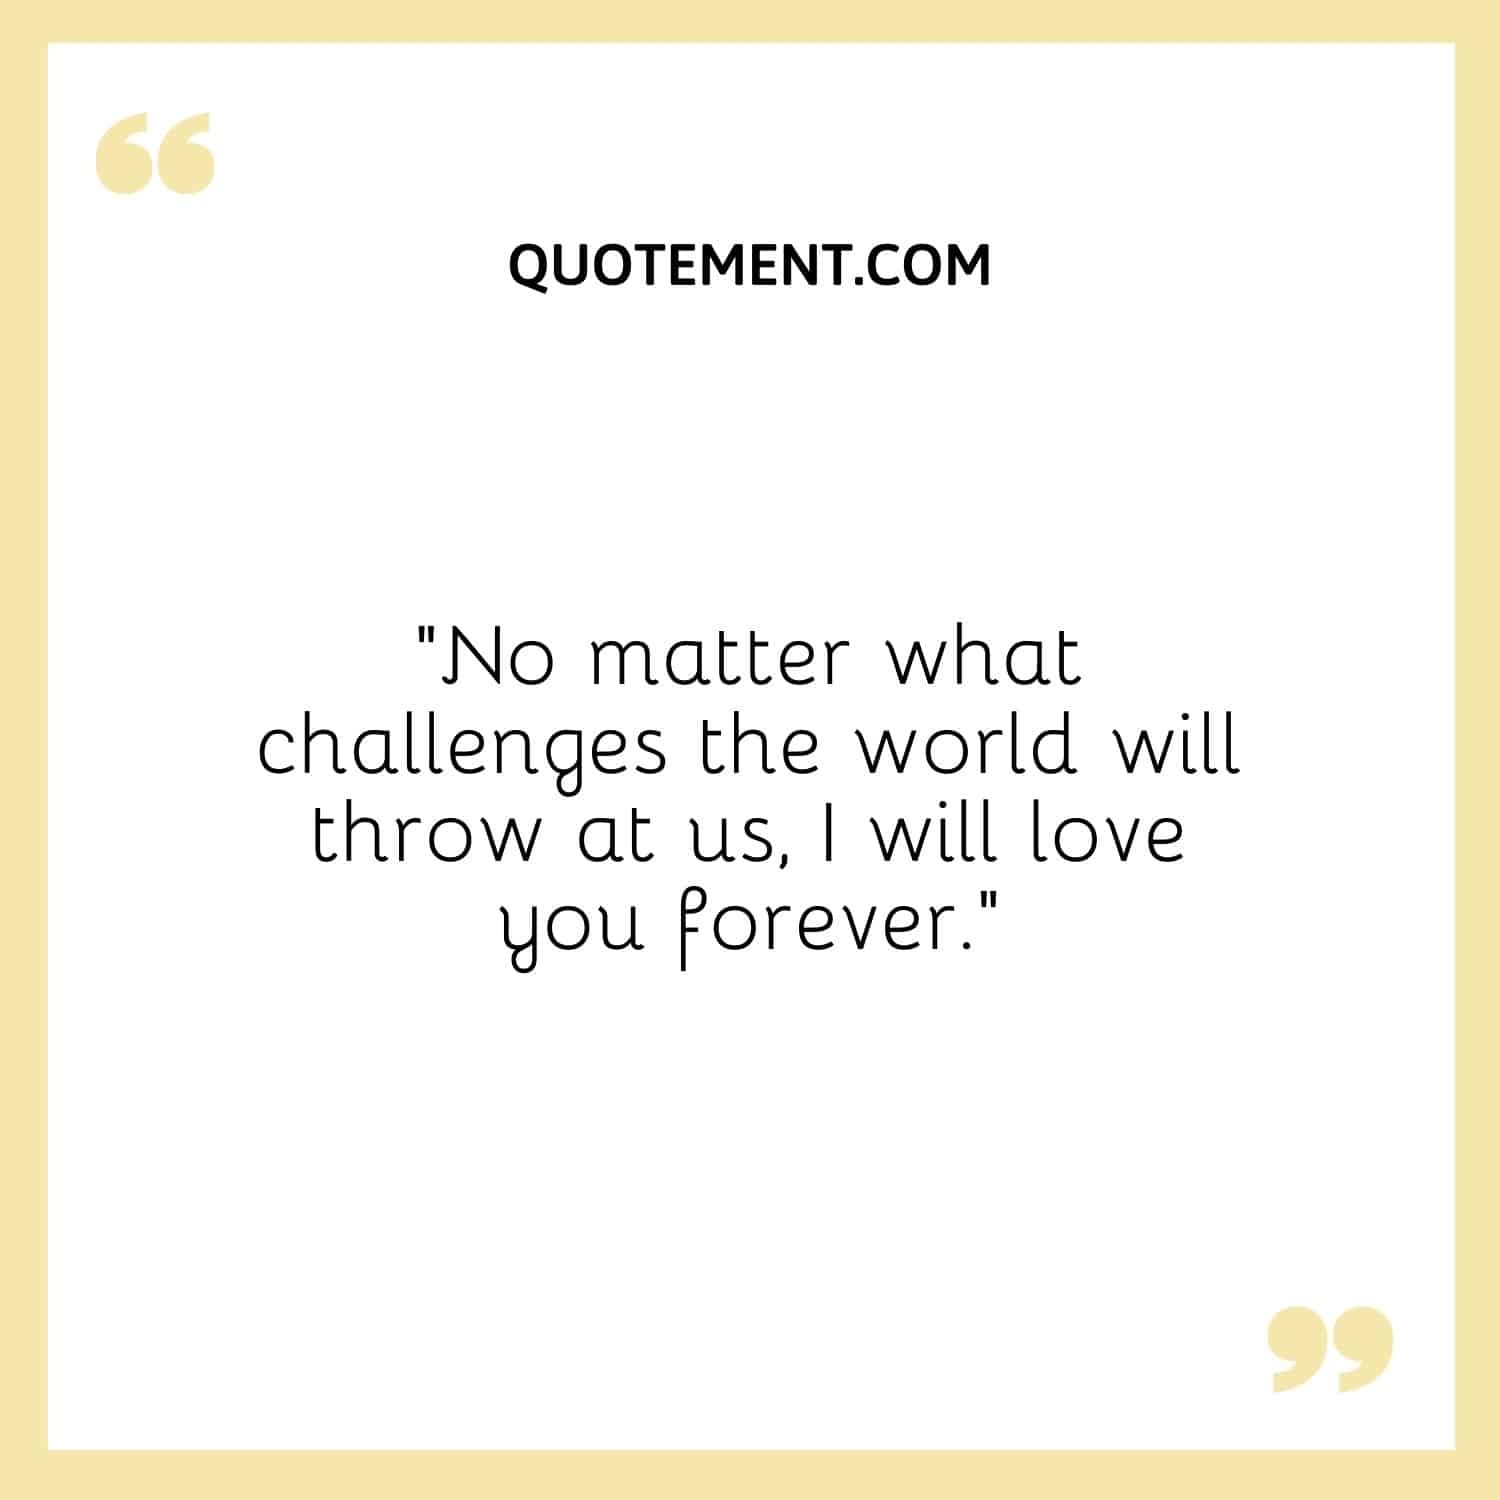 No matter what challenges the world will throw at us, I will love you forever.